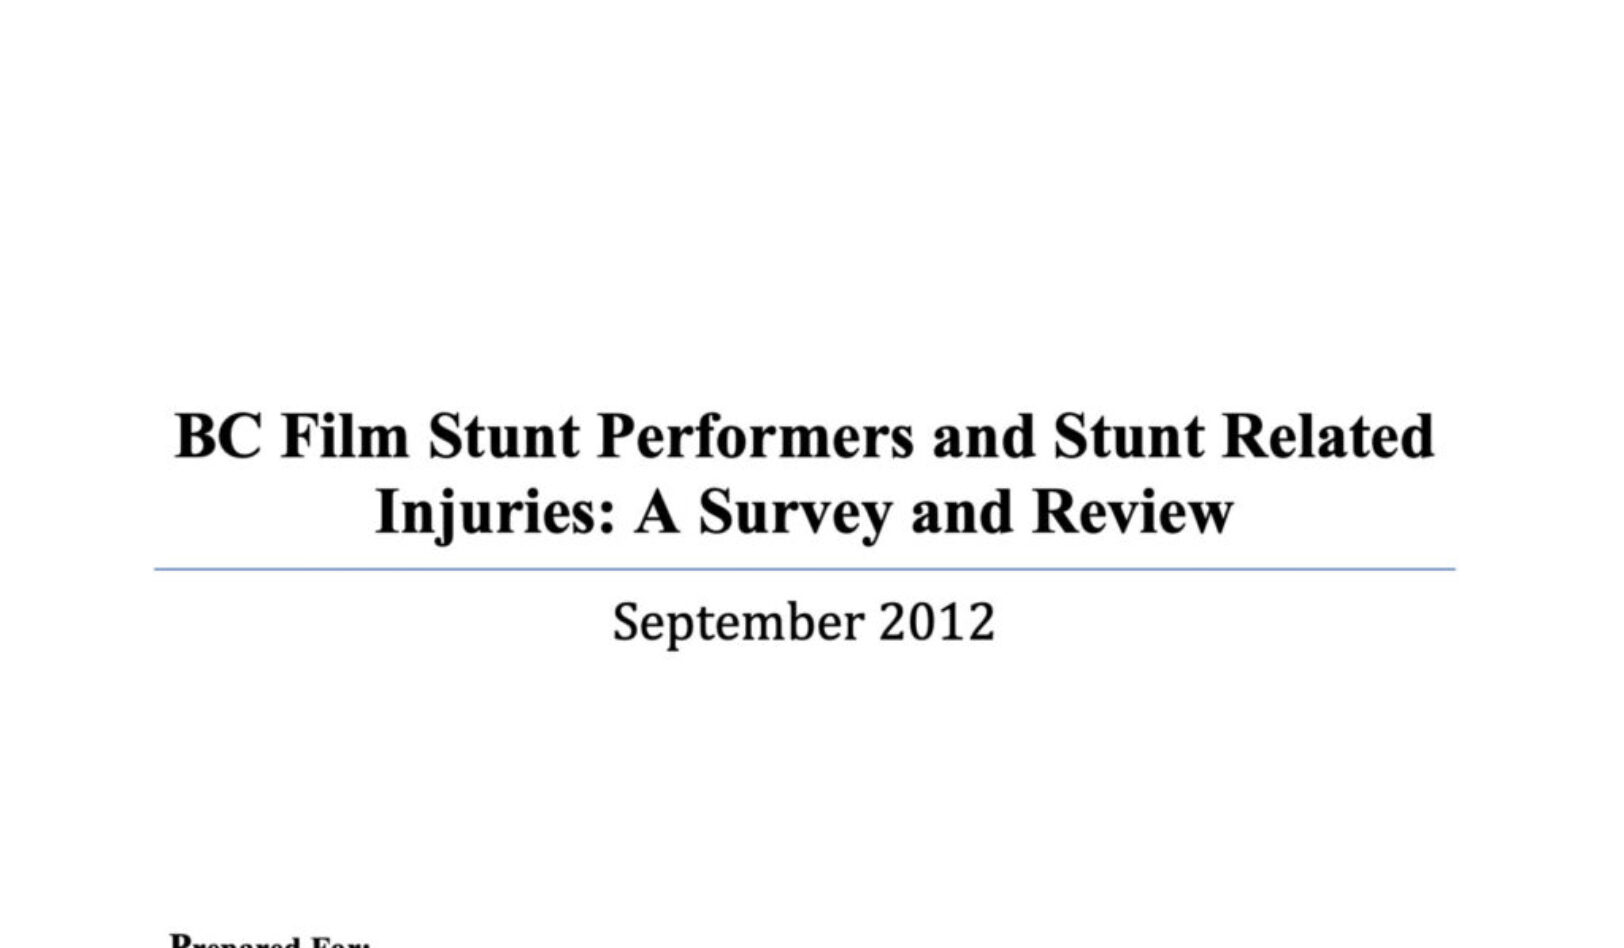 BC Film Stunt Performers and Stunt Related Injuries: A Survey and Review